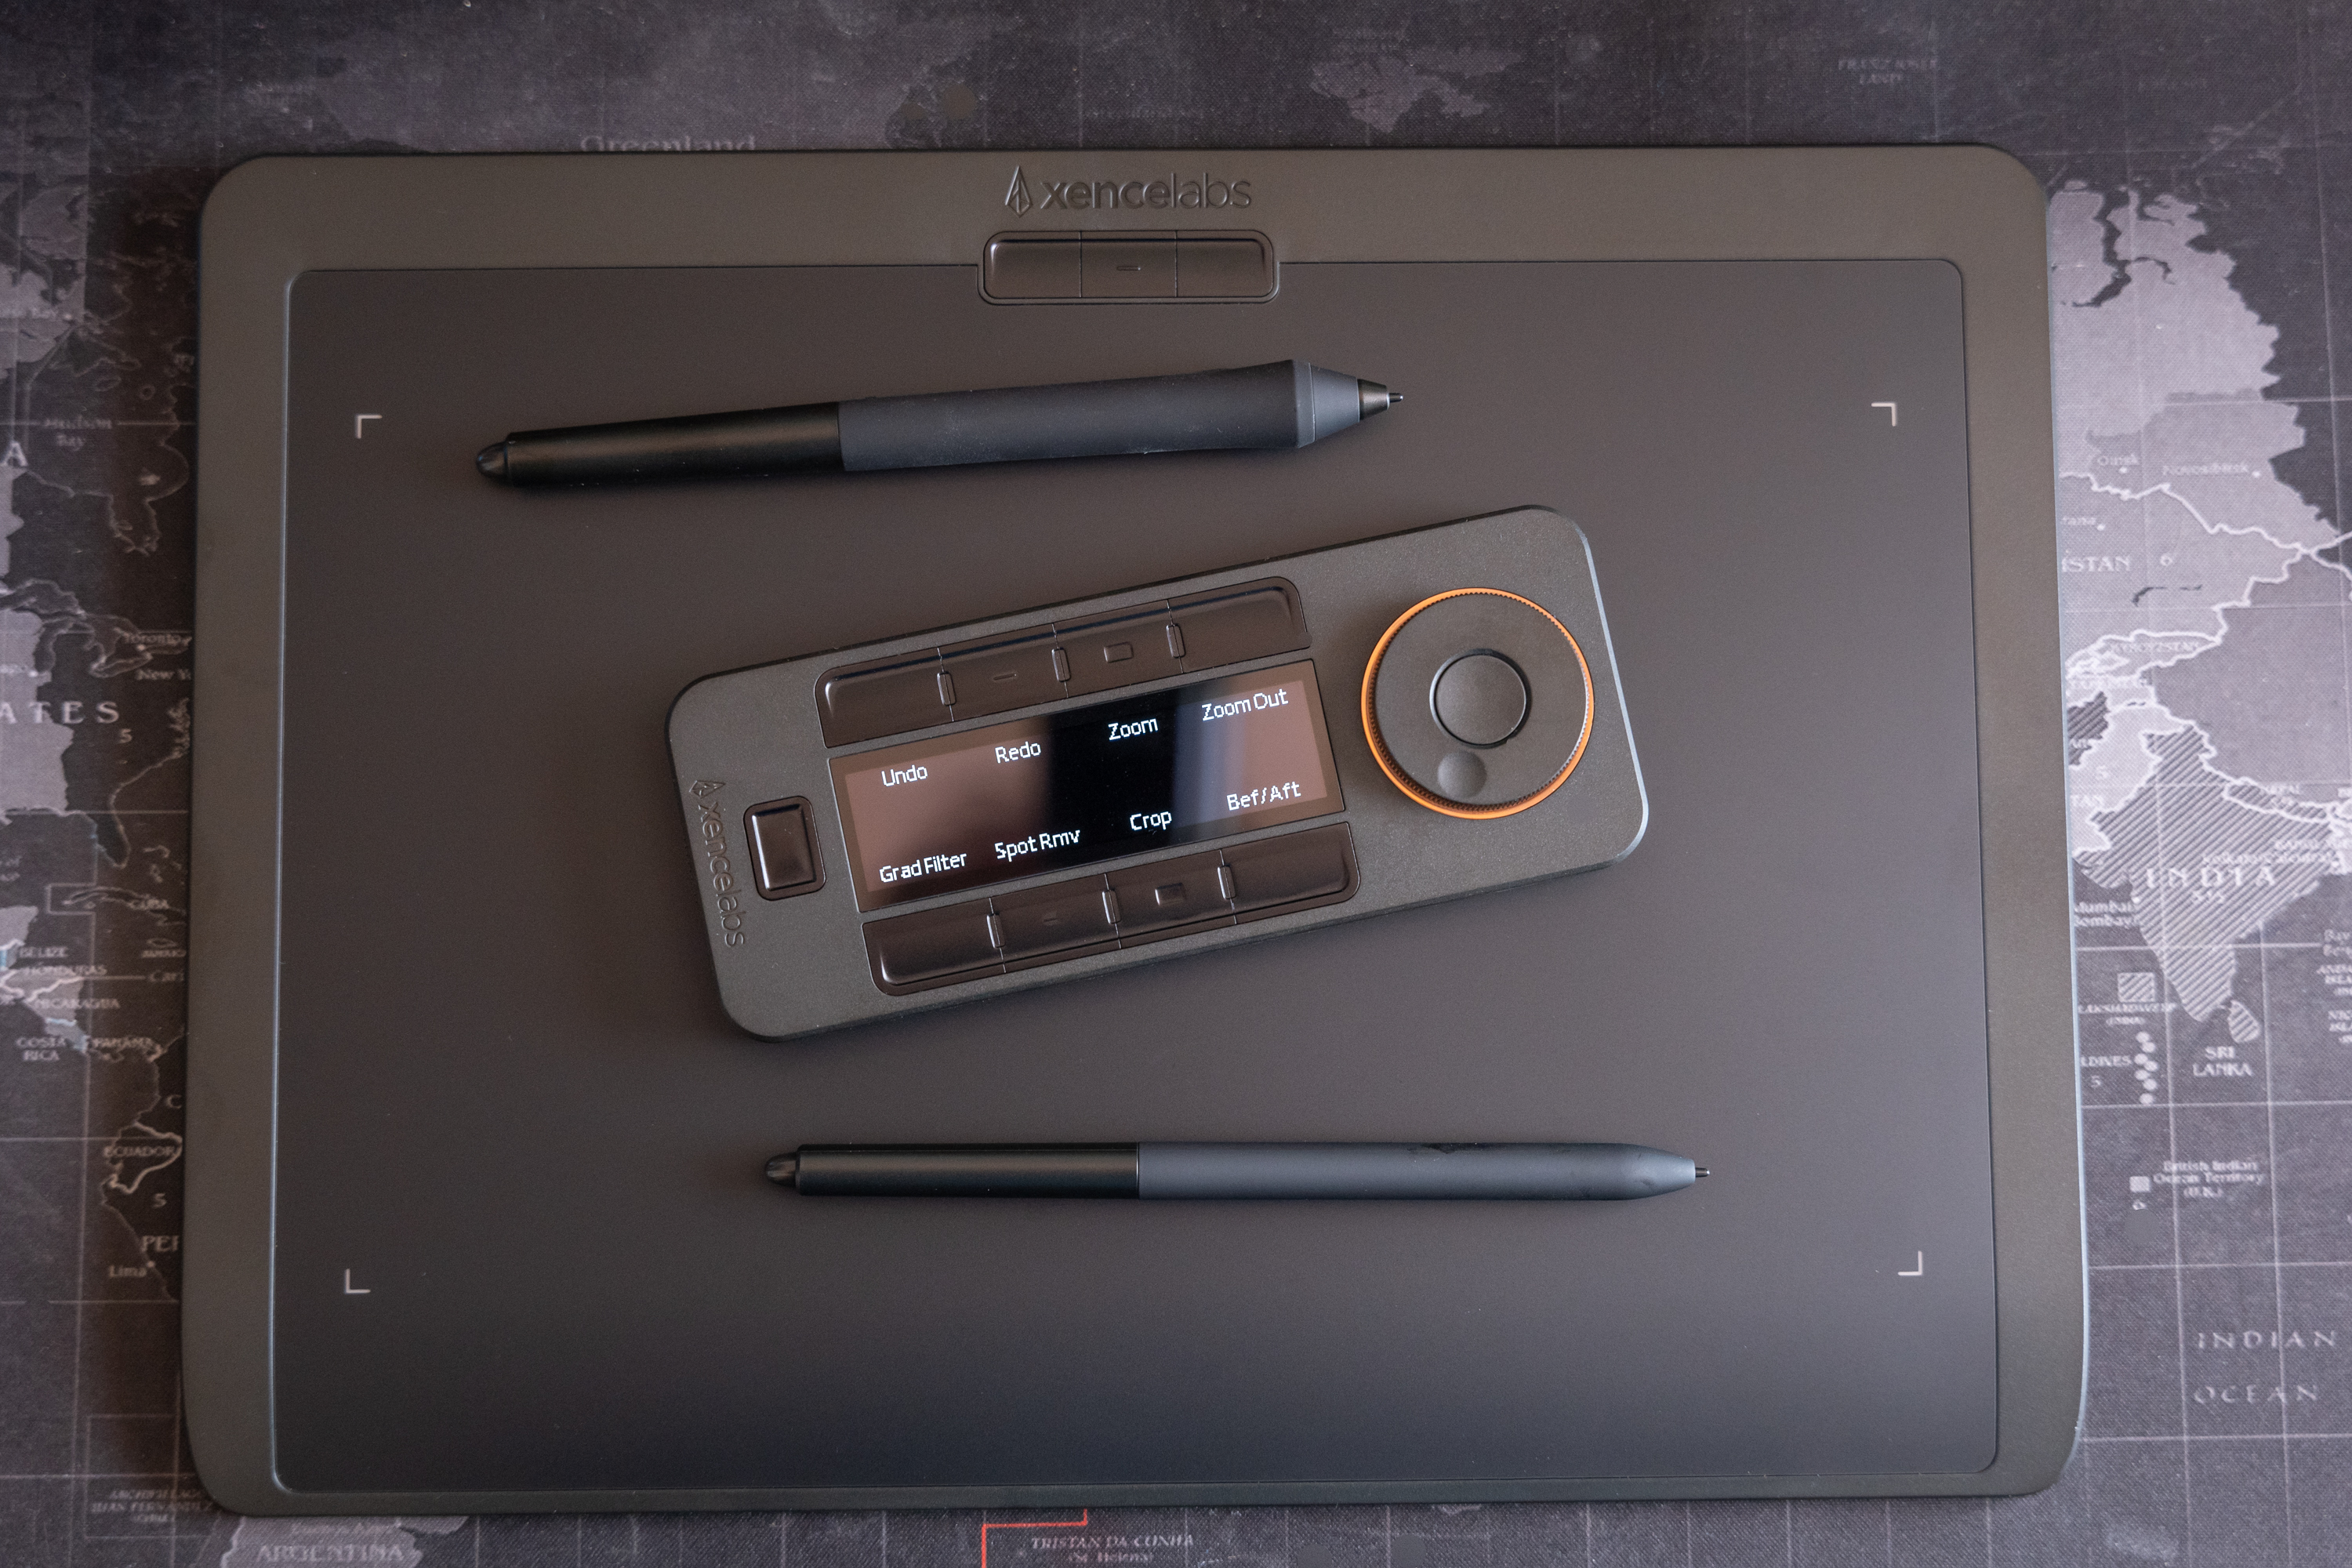 Your Time's Up Wacom: Xencelabs Pen Tablet With Quick Keys Review